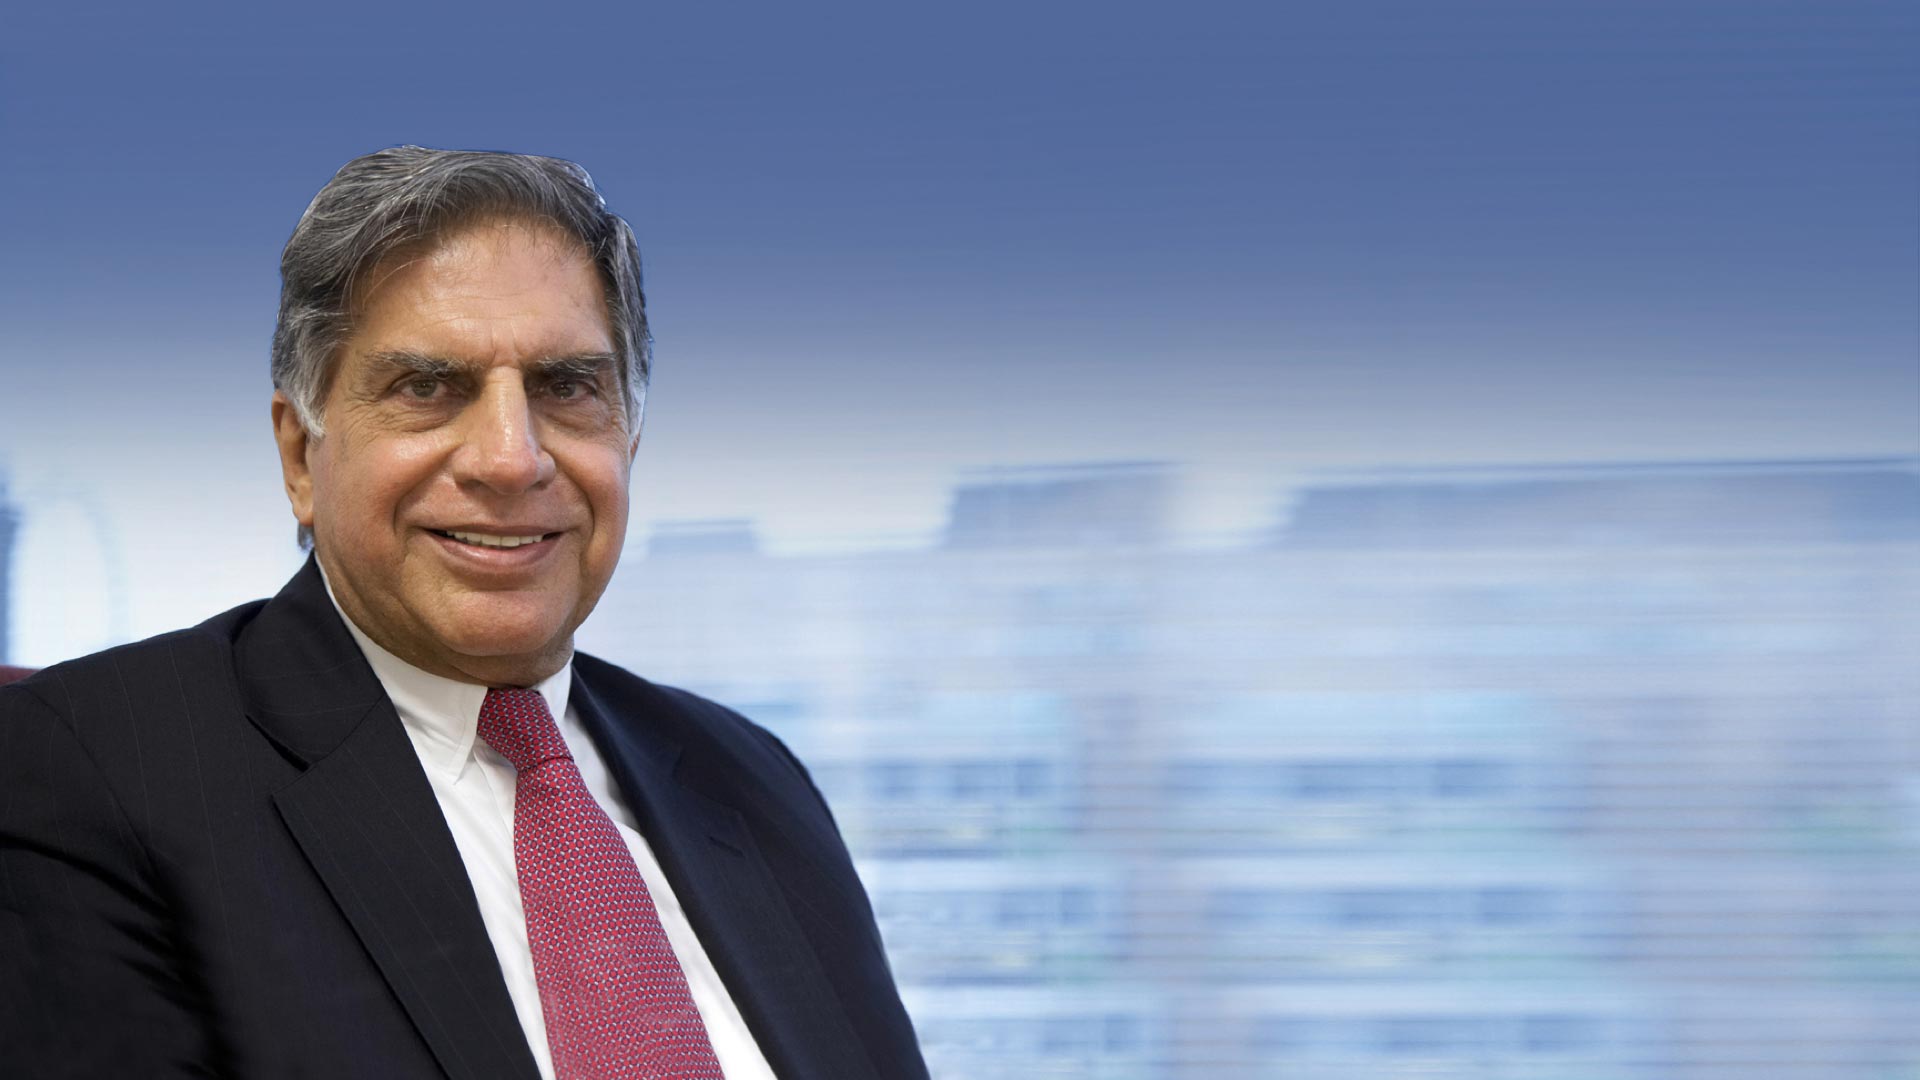 10 Success lessons from Ratan Tata - “The Titan of Indian Business” for entrepreneurs